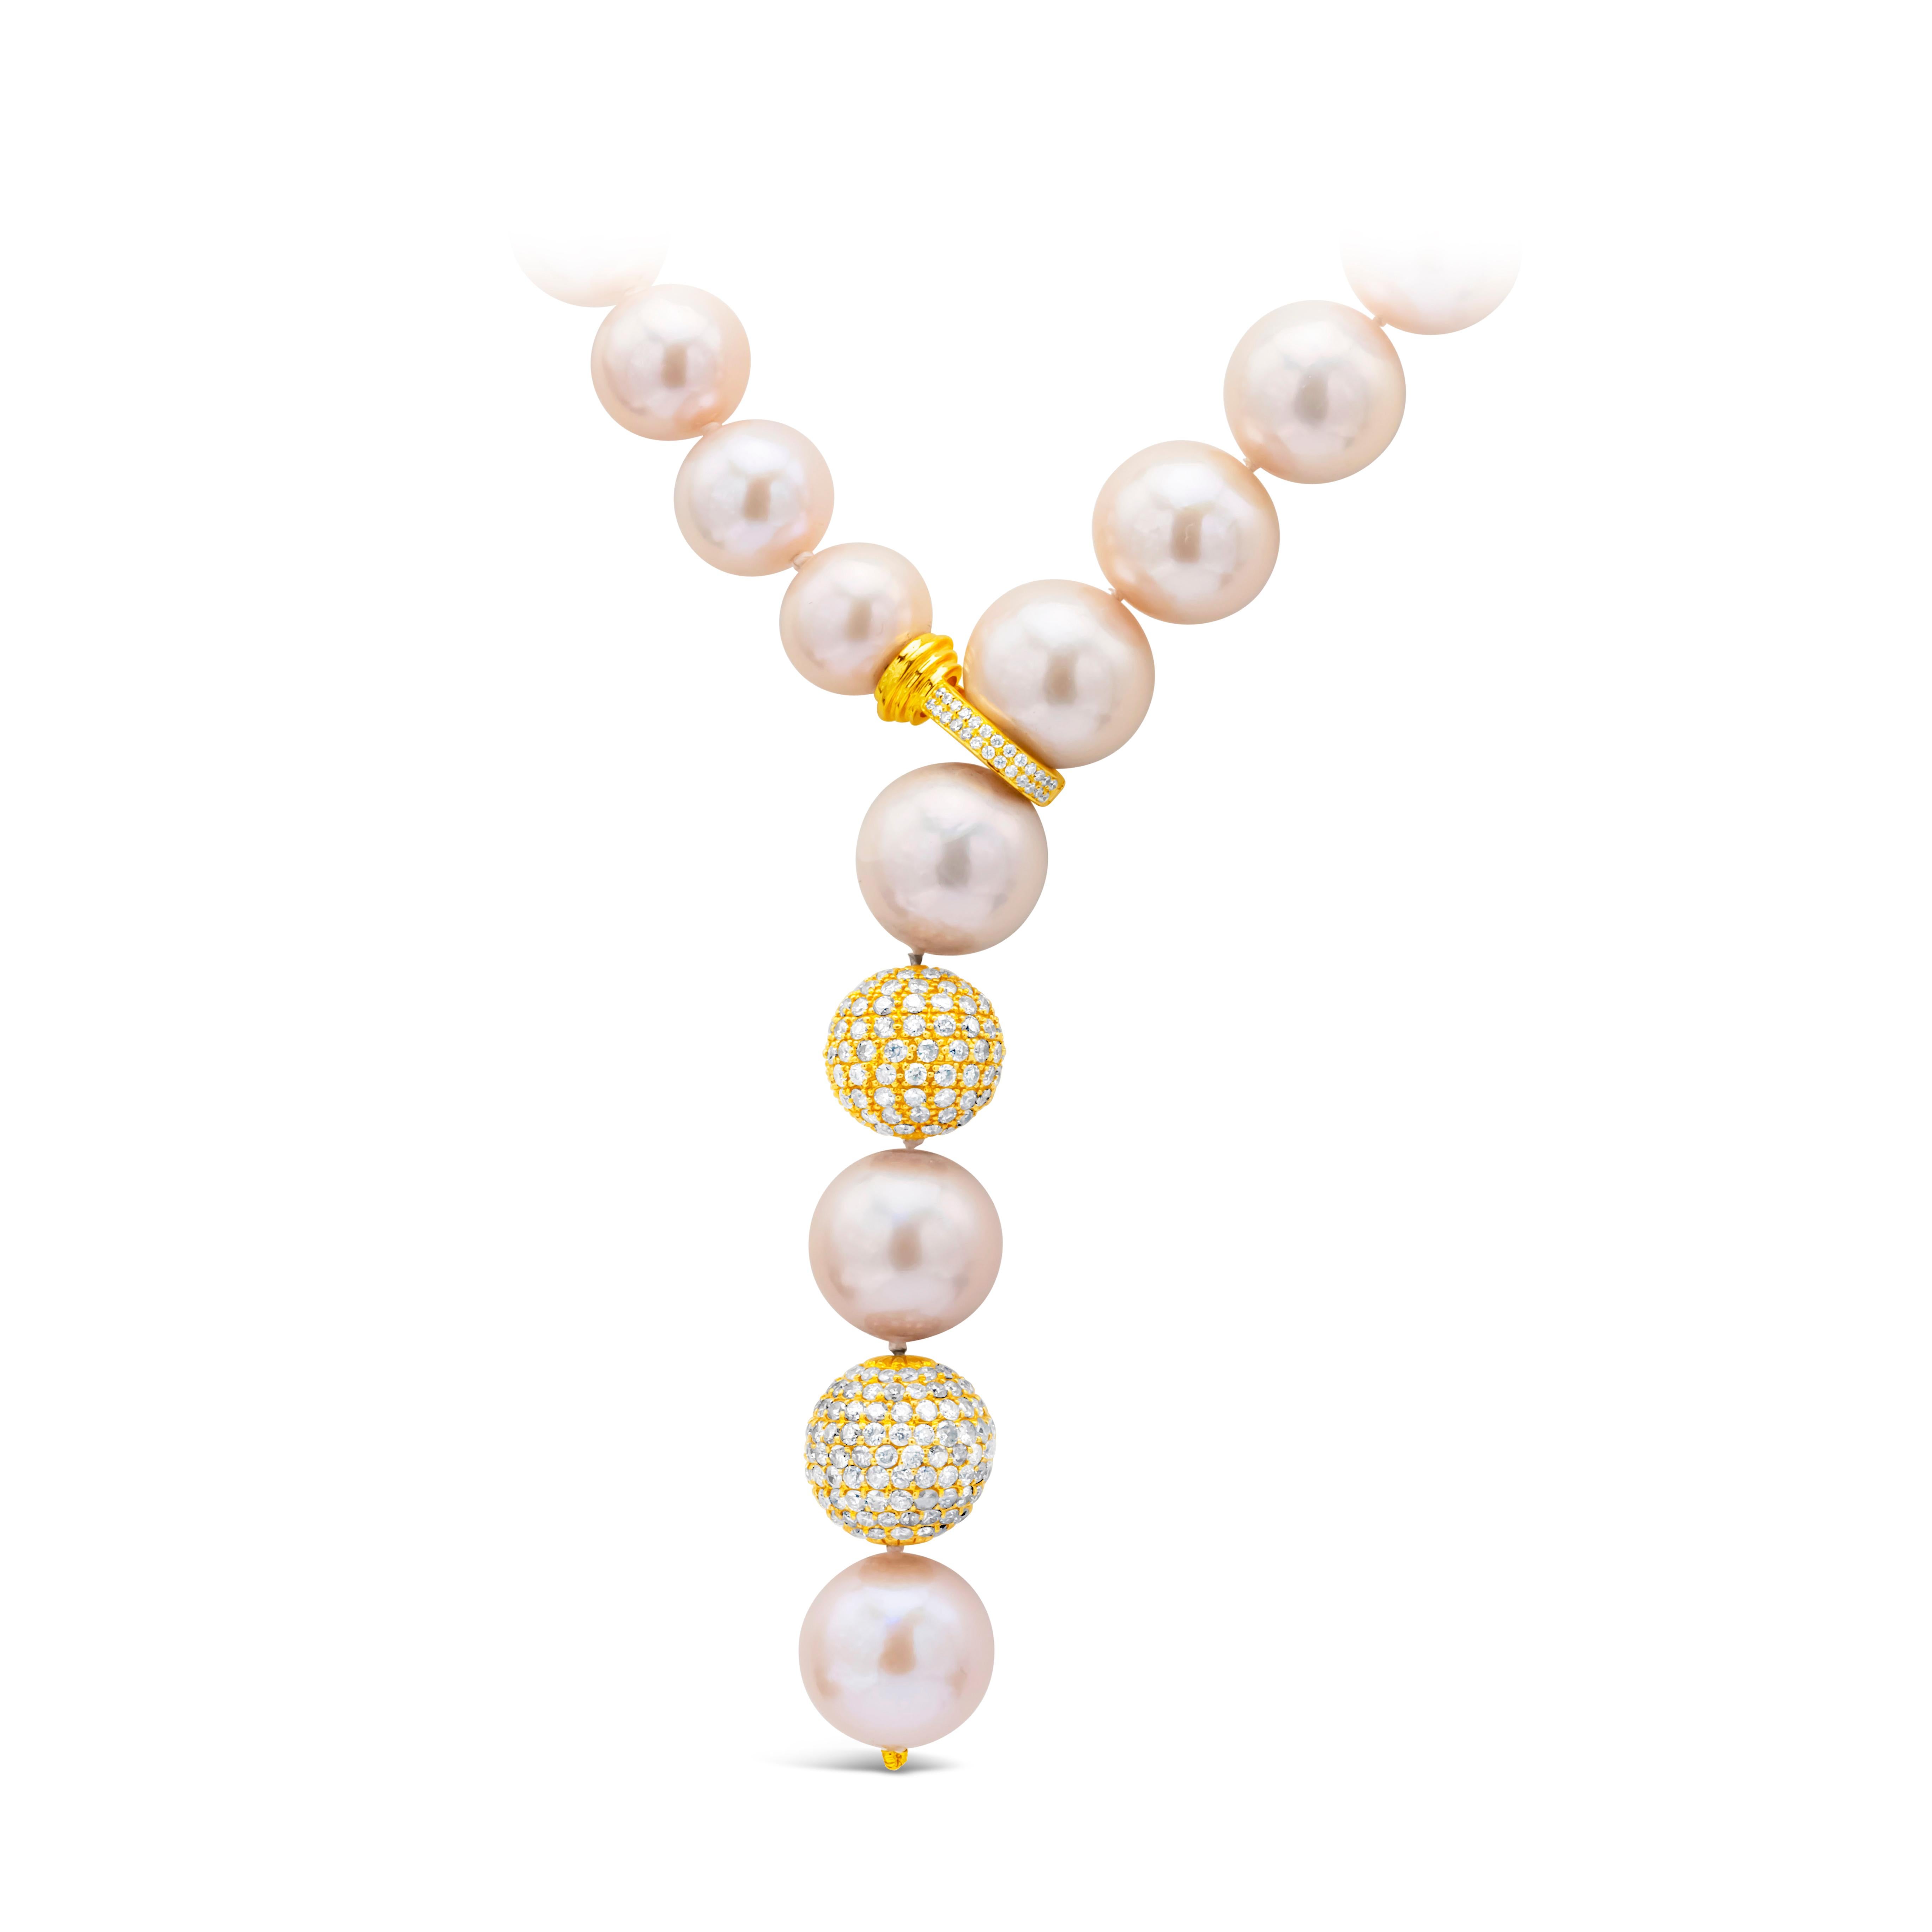 A beautiful pearl necklace showcasing 11.5-14.5mm south sea pink pearl with diamond clasp, and features 2 diamond encrusted balls. Diamond weigh 4.50 carats total. Made in 18K Yellow Gold.

Style available with matching earrings.